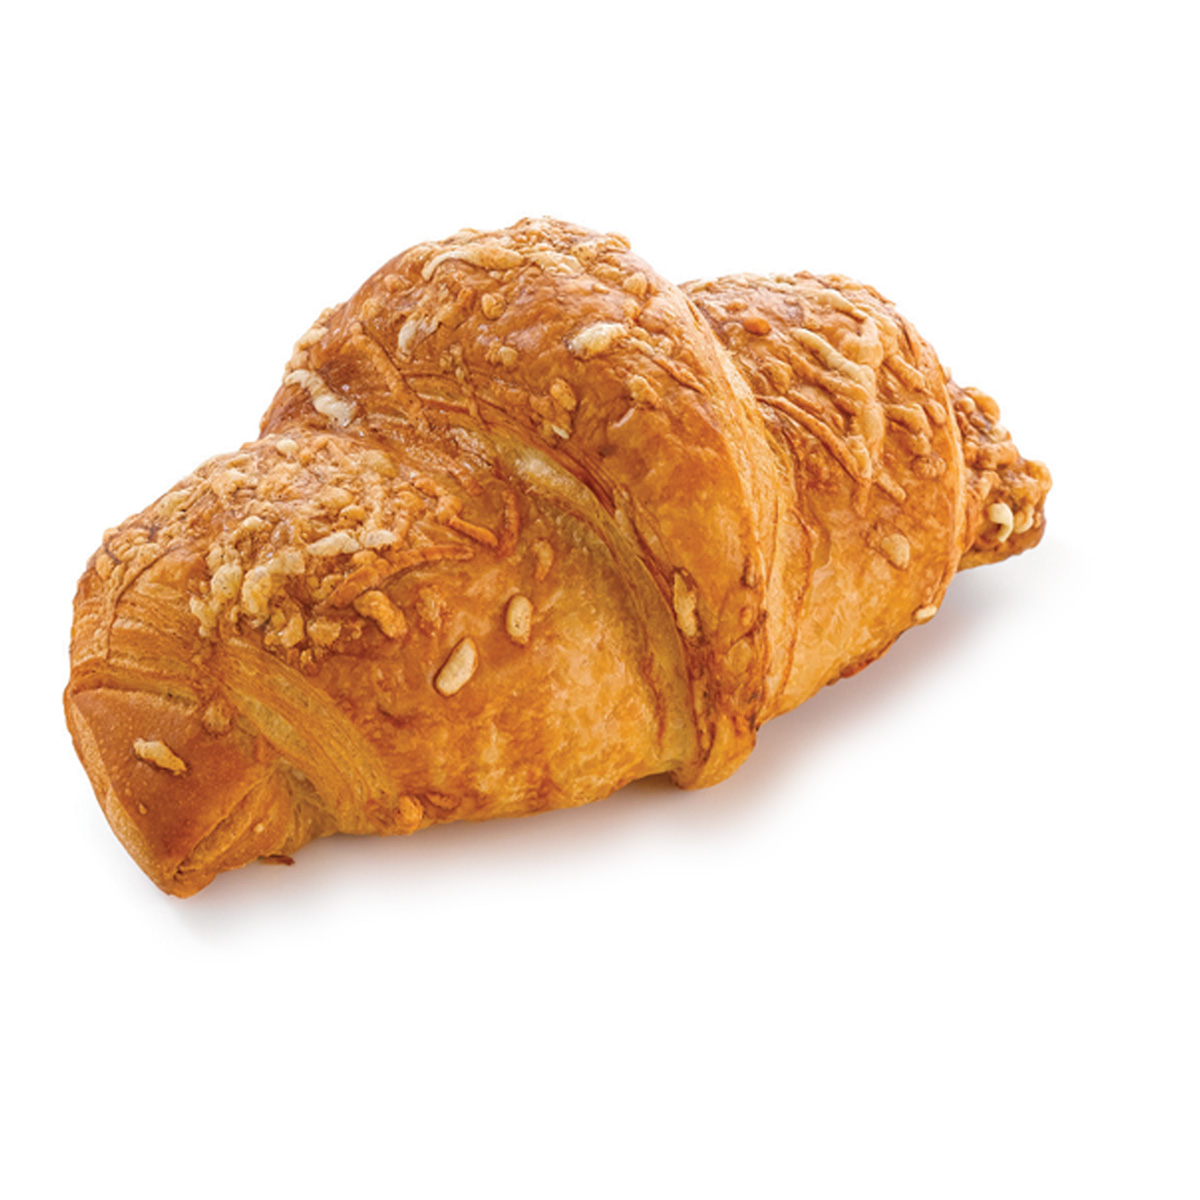 Molco Croissant fromage